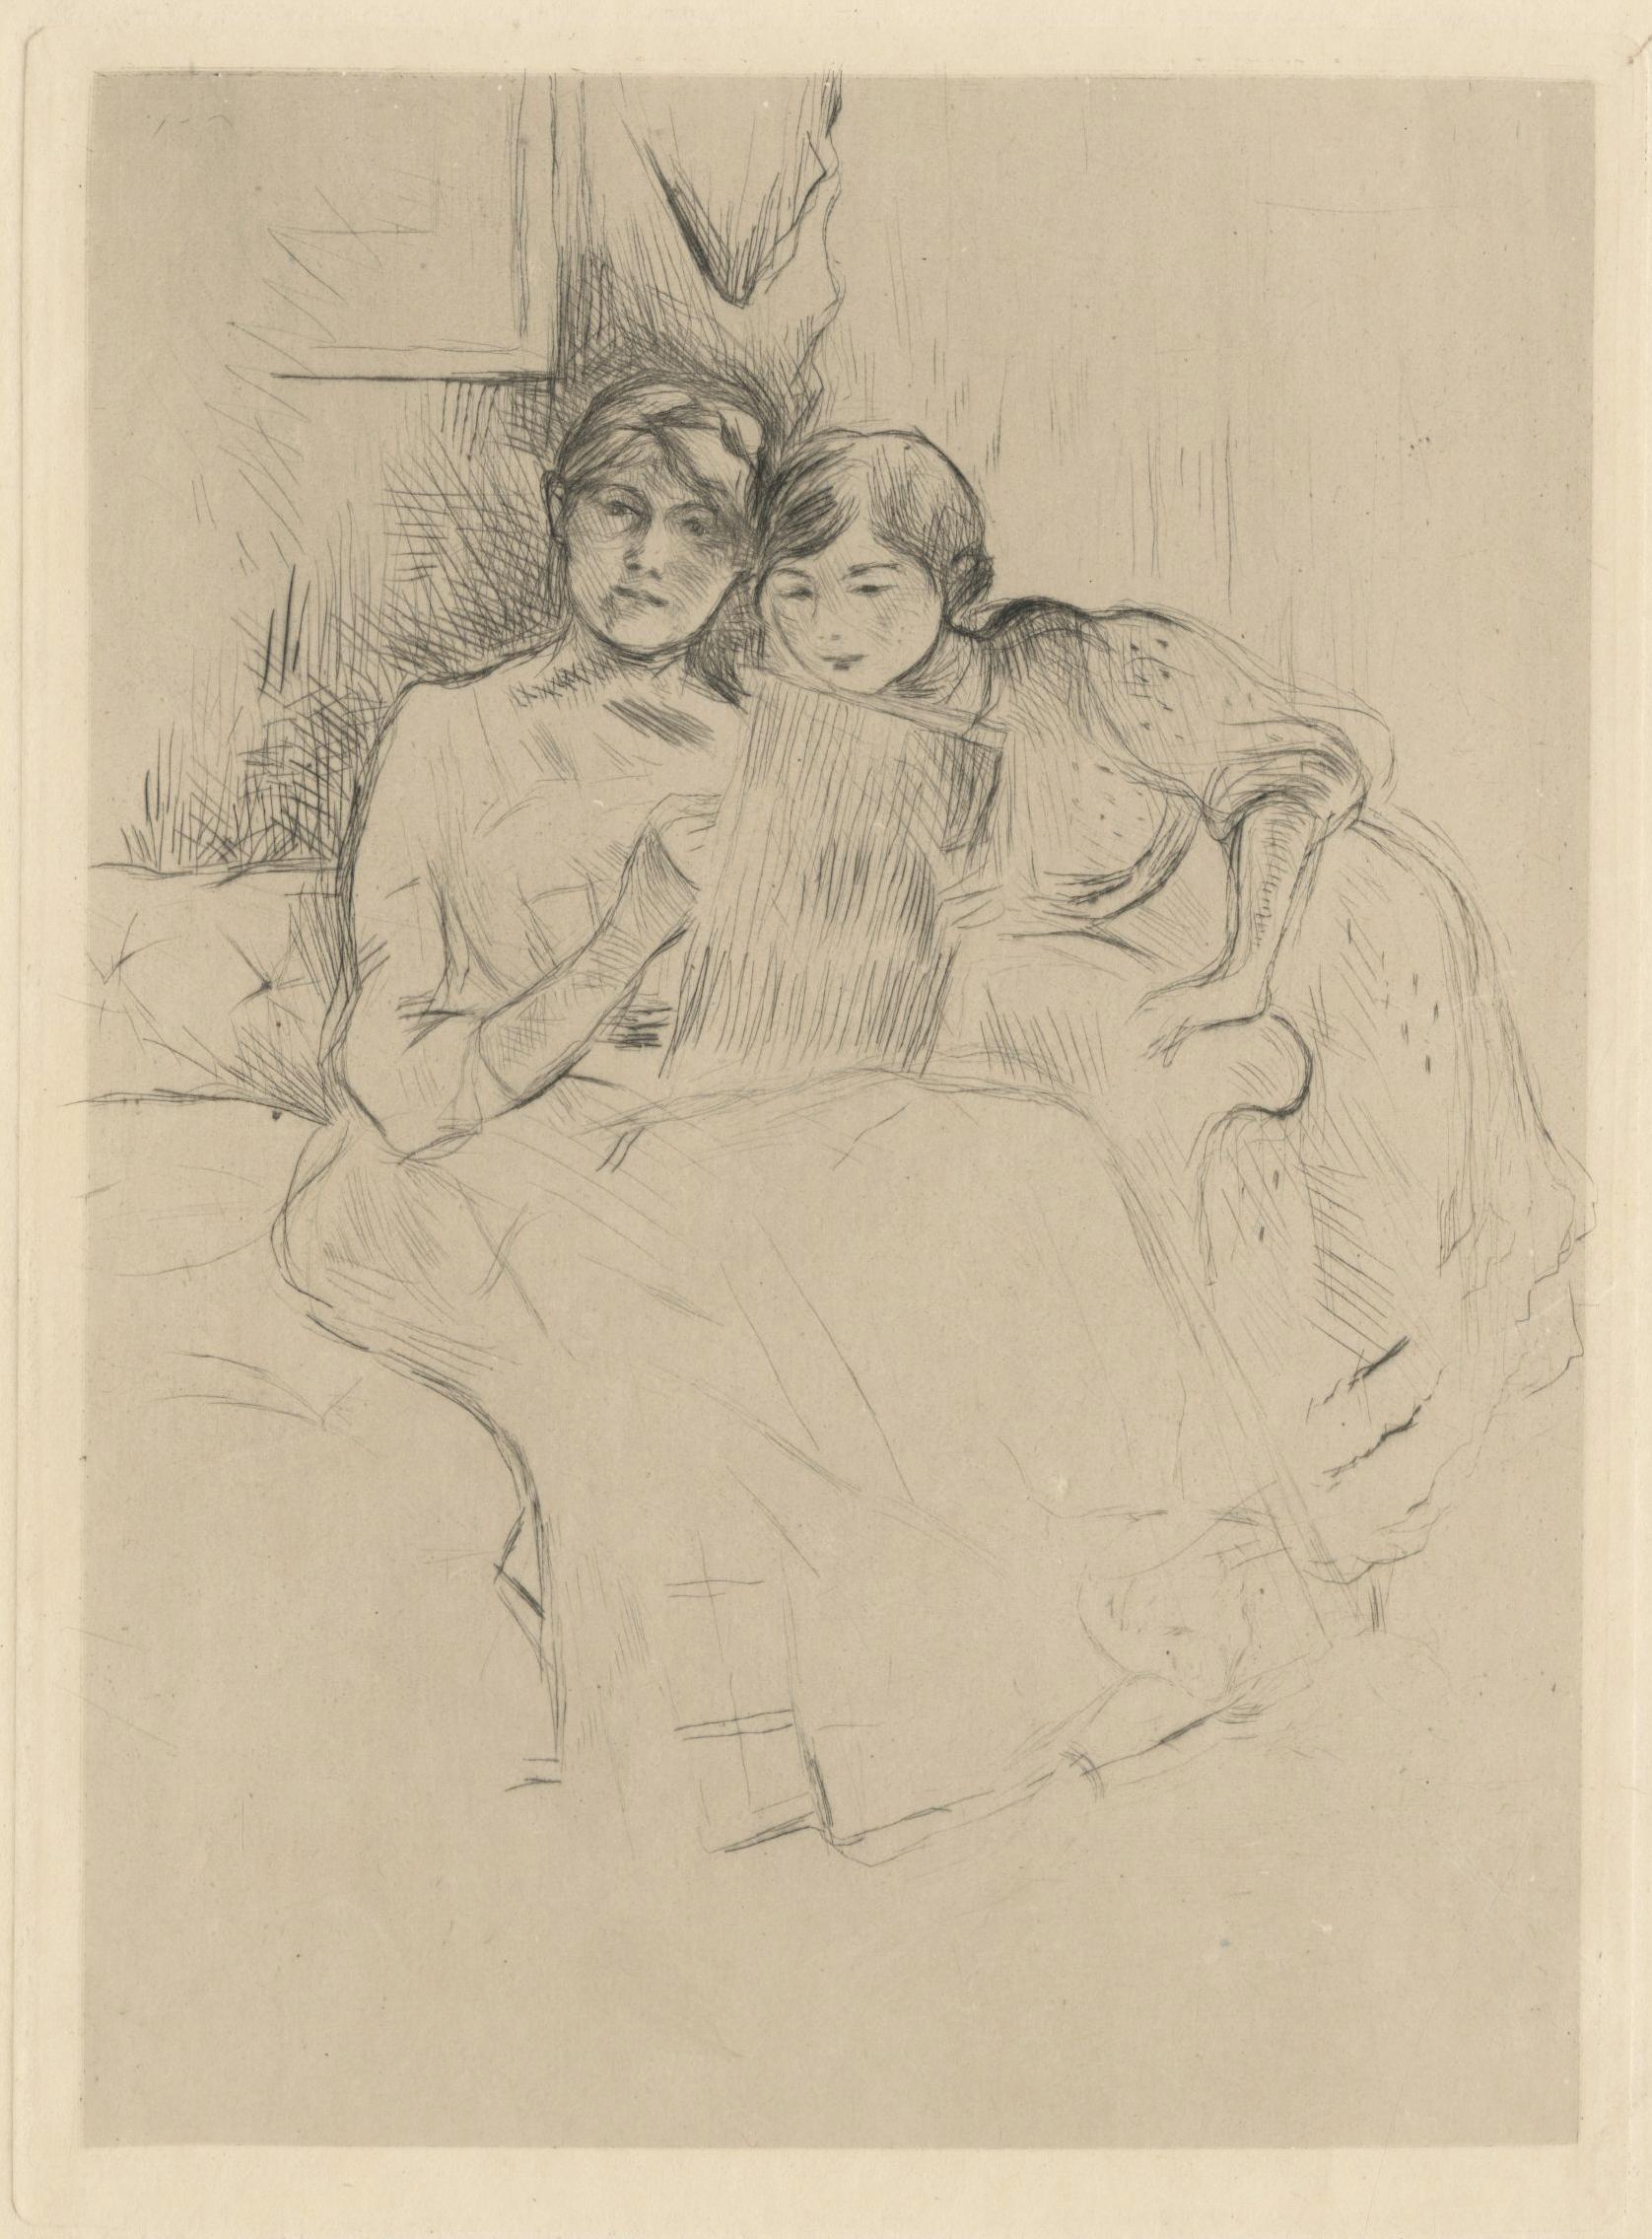 Berthe Morisot dessinant, avec sa fille
Drypoint on Japan paper, 1889
Unsigned (as issued)
From the deluxe edition before the cancellation holes upper and lower center
Reference: Johnson, Vollard, No. 8, before cancellation holes in the top and